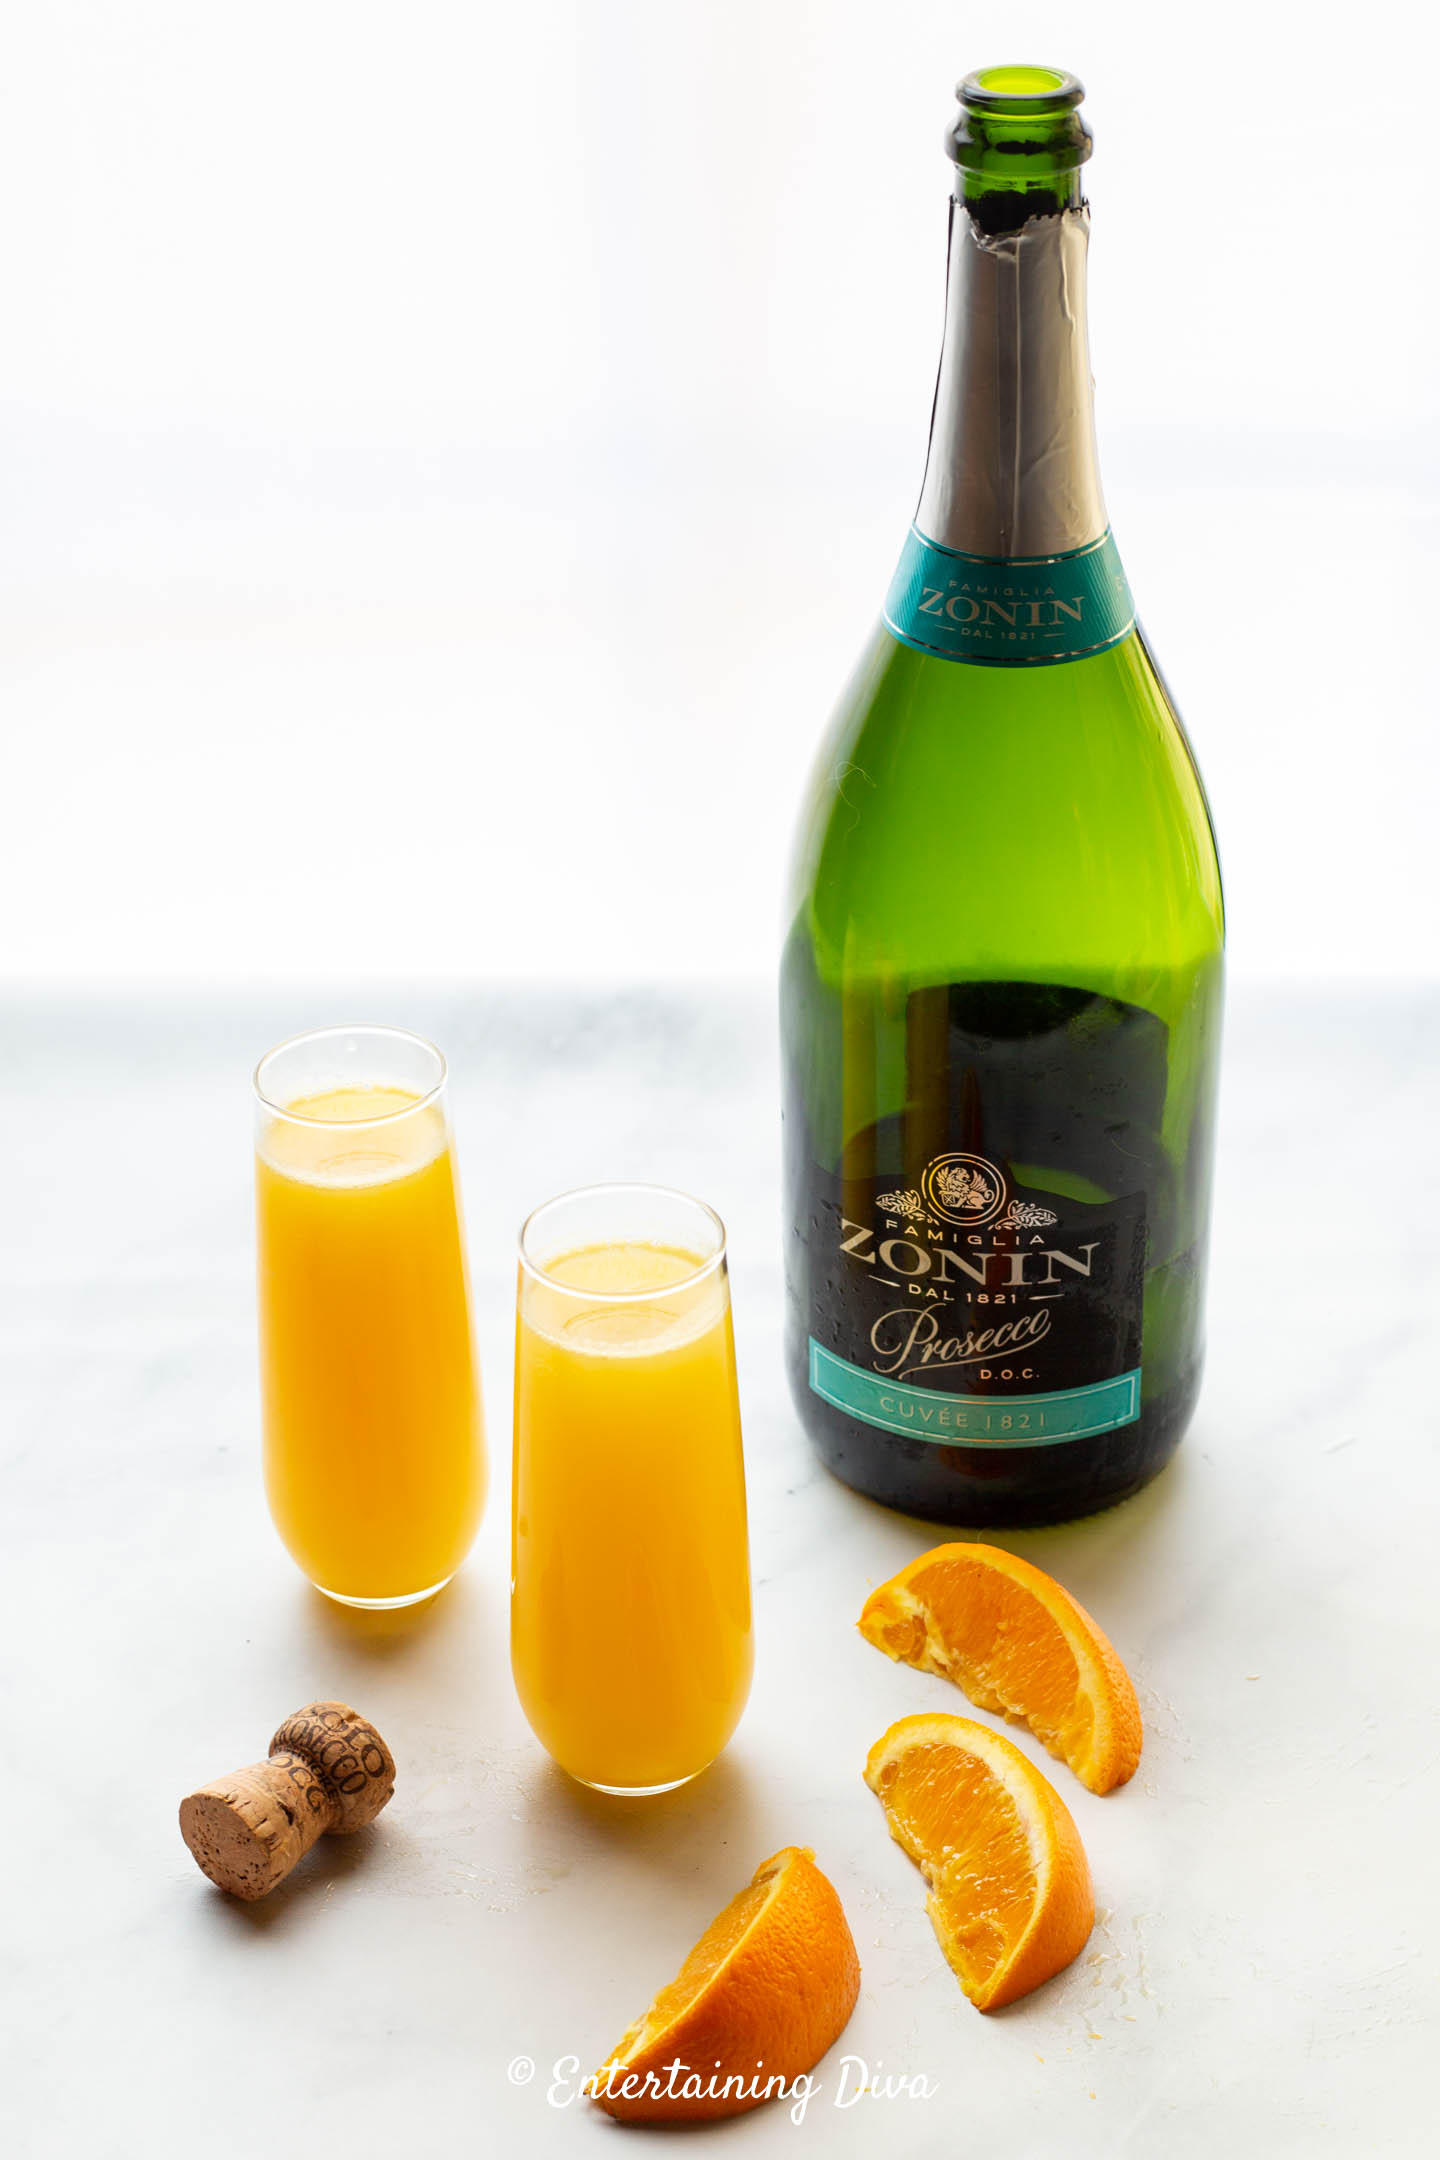 Mimosa ingredients - Prosecco and fresh-squeezed orange juice